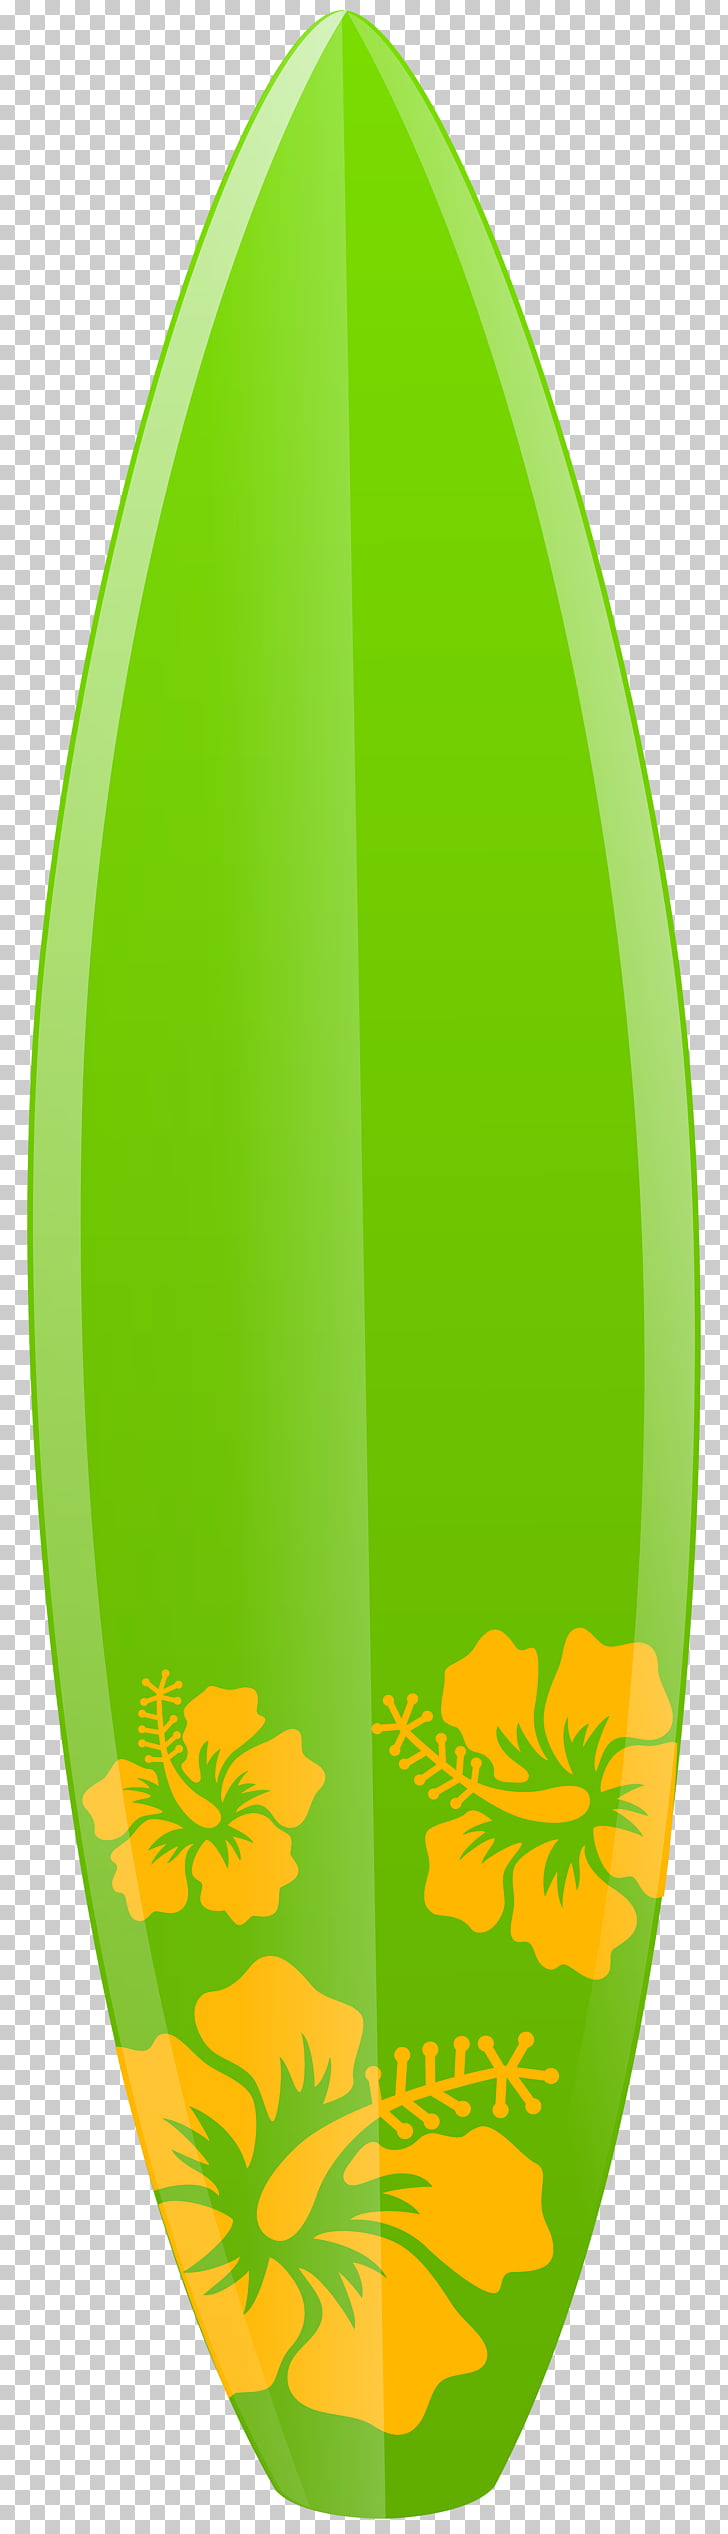 Surfboard Surfing Drawing , surfing, blue and green floral